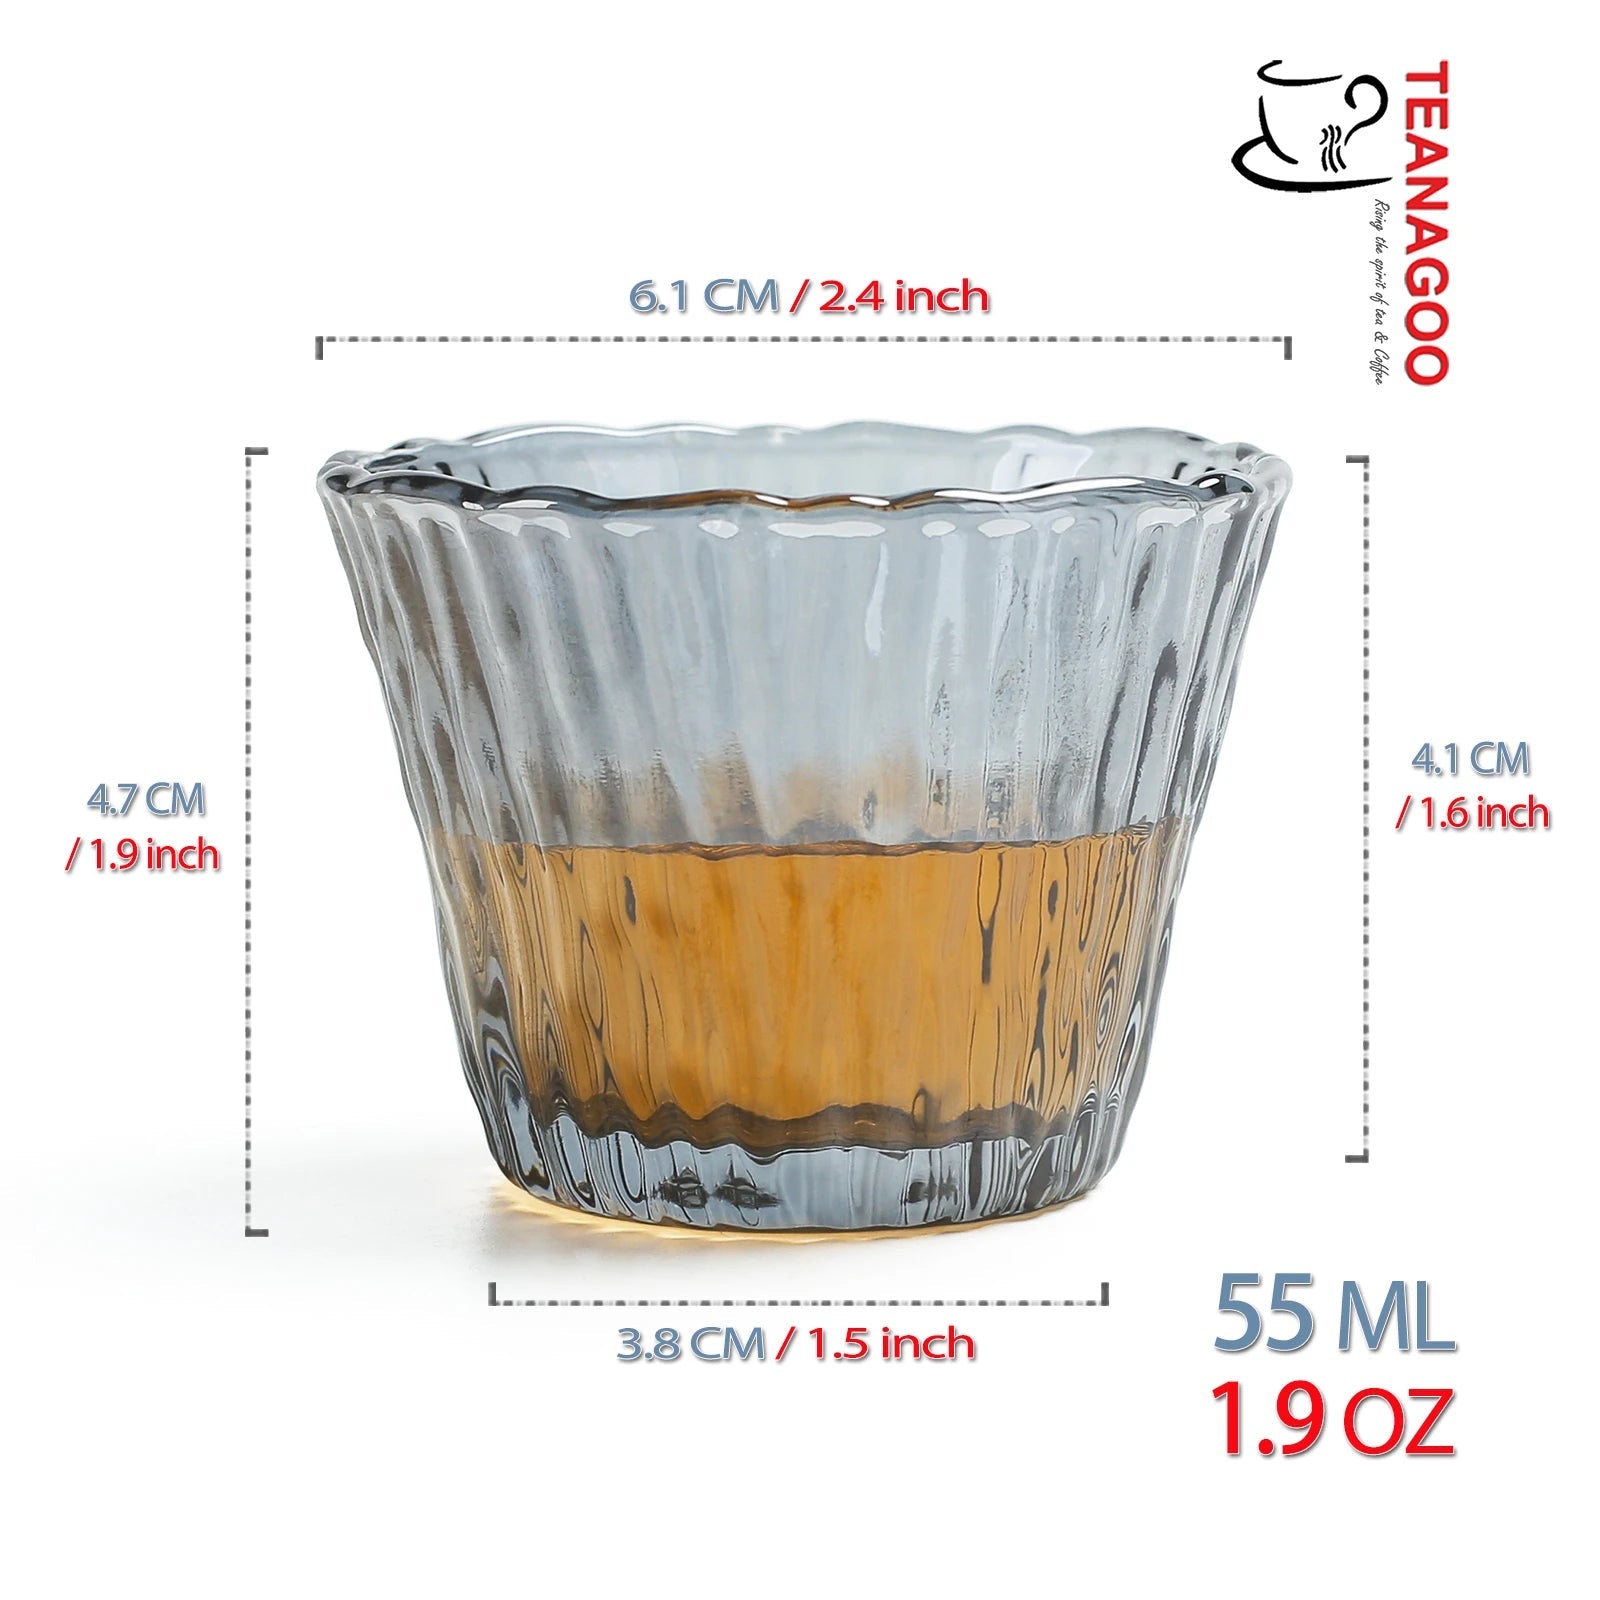 6pcs Handmade Heat-Resistant Glass Teacup with Handle - Perfect for Coffee,  Whiskey, and More - Exquisite Handicraft and Nice Gift